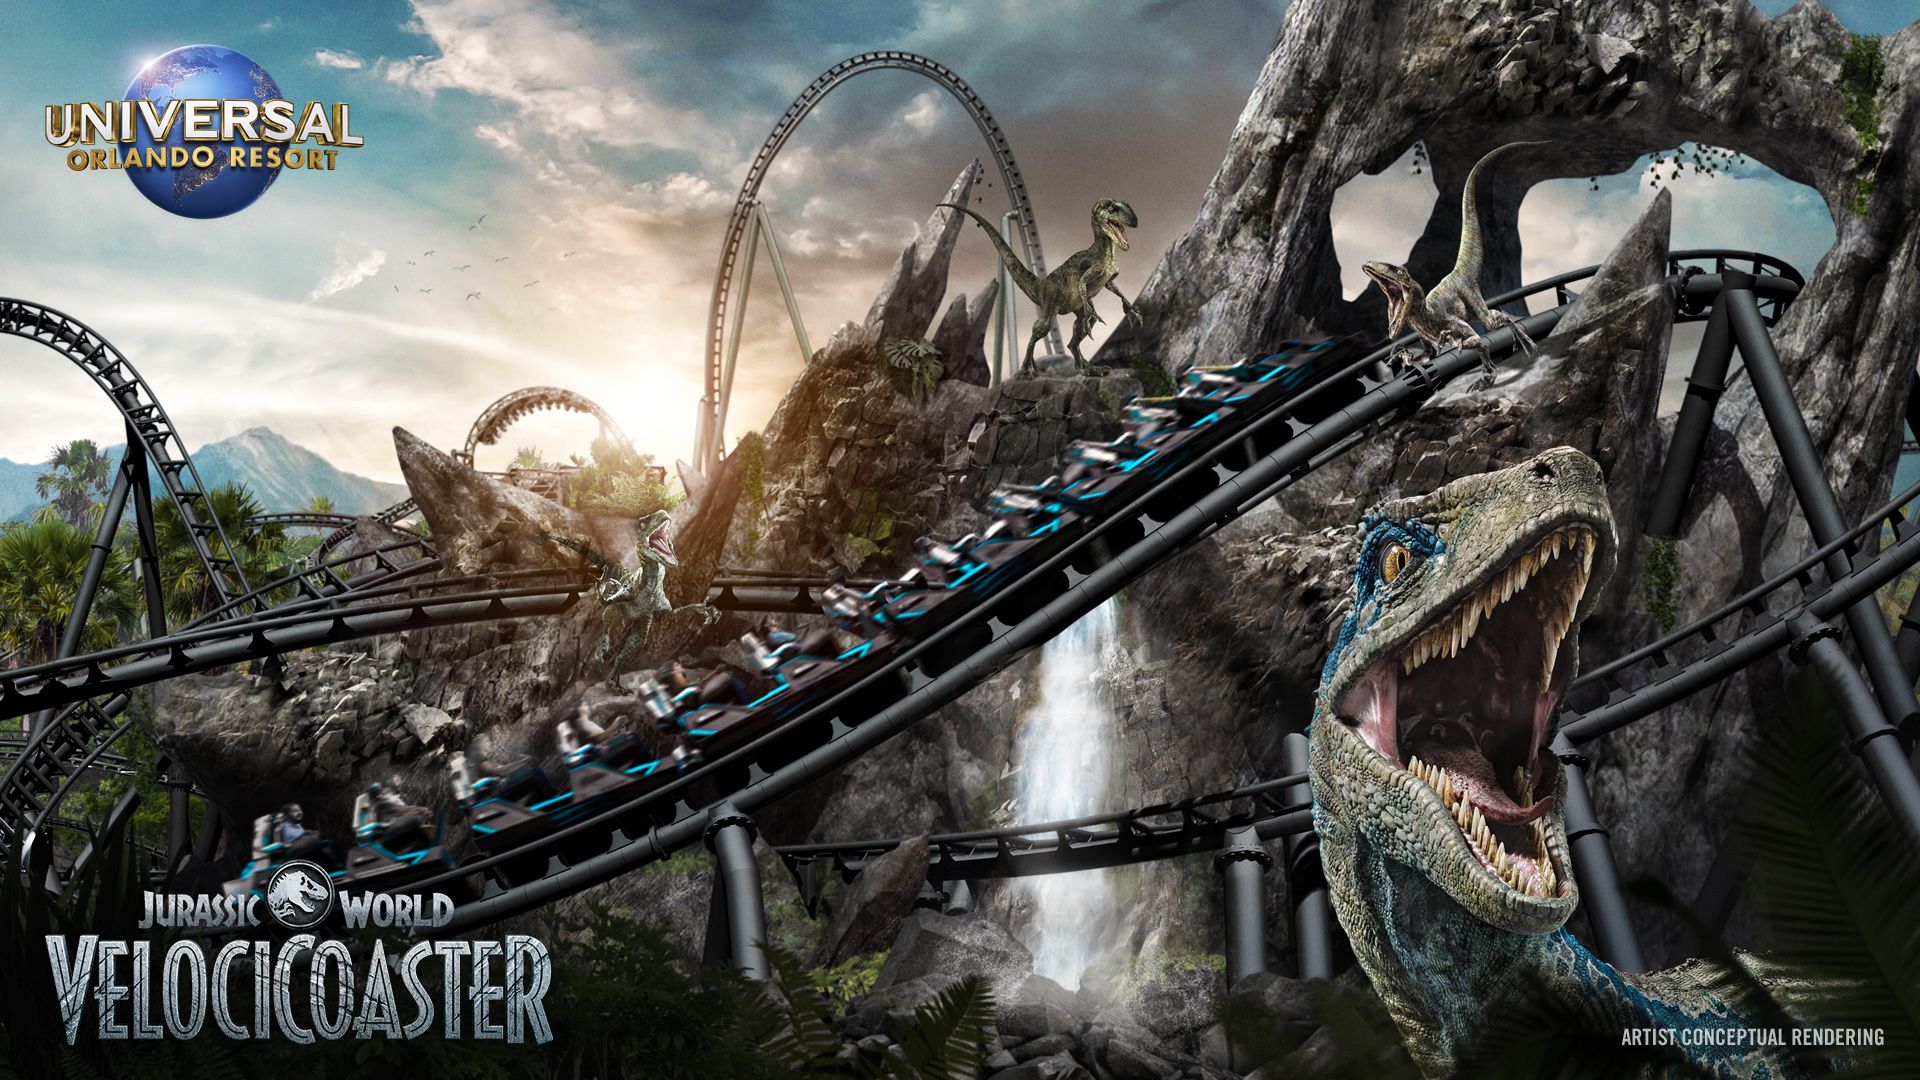 Florida’s fastest and tallest launch coaster – along with a pack of fierce Velociraptors – will be unleashed at Universal Orlando Resort in 2021 with the debut of Jurassic World VelociCoaster